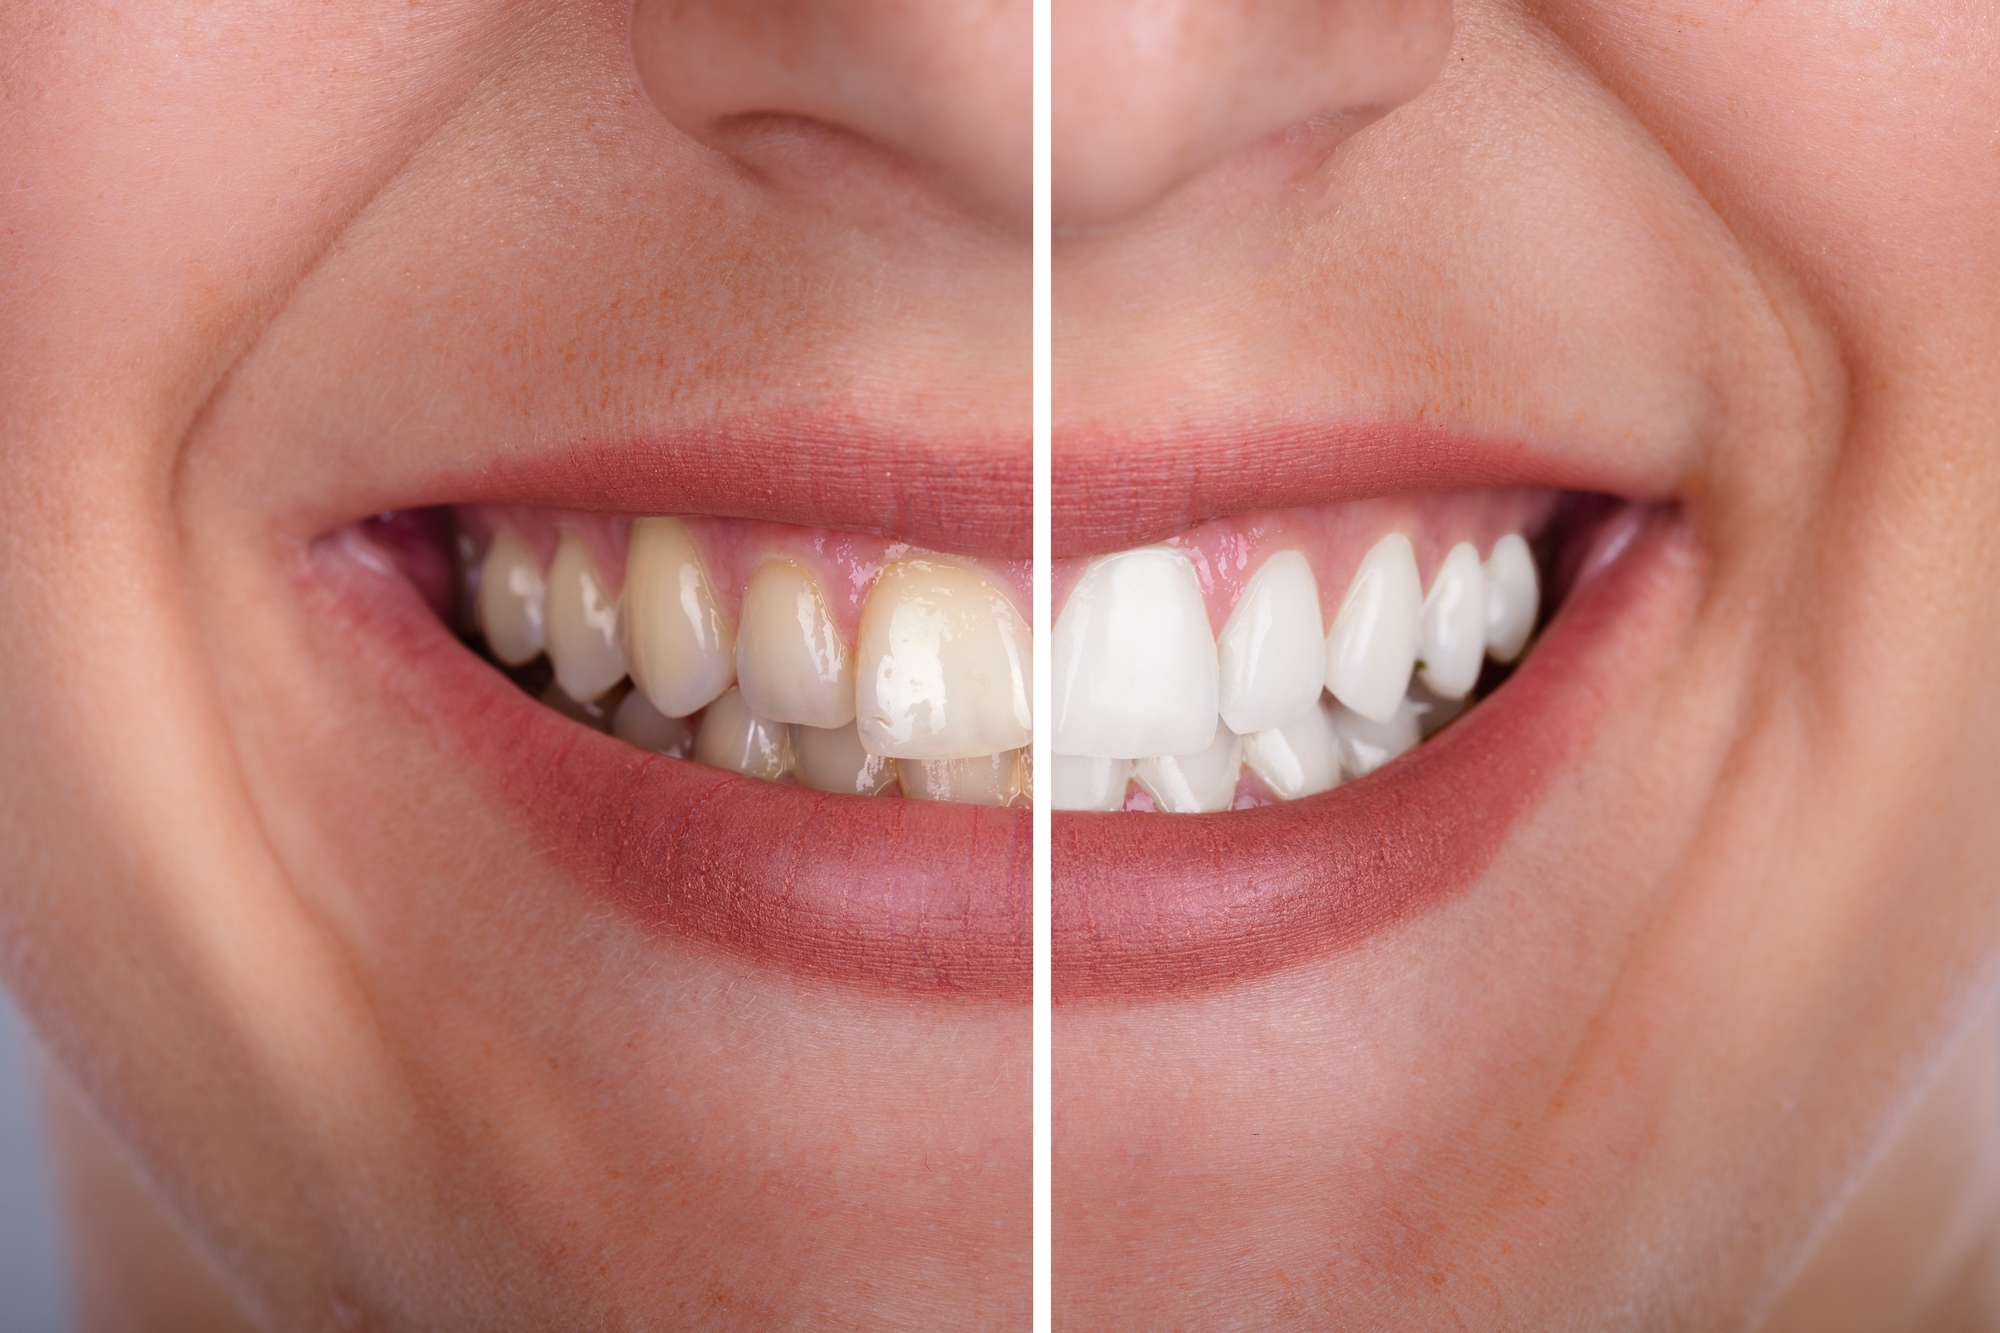 Teeth before and after teeth whitening. 